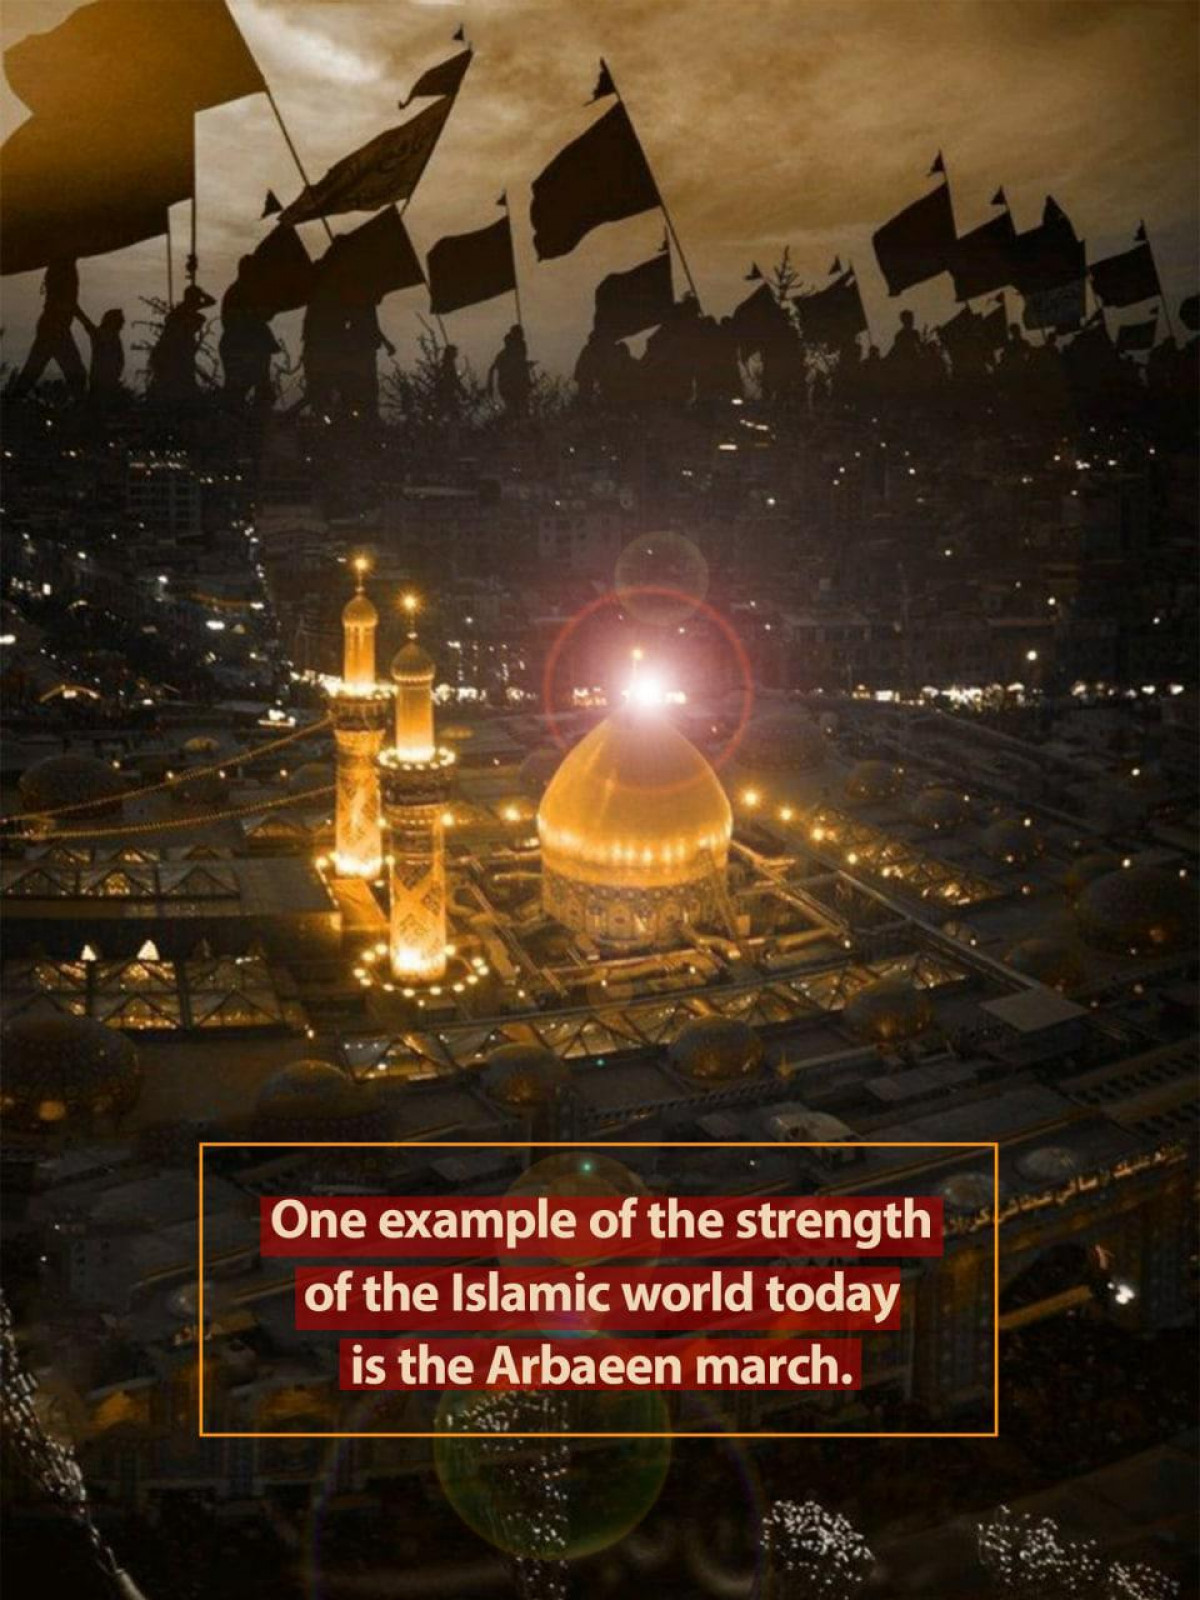 One example of the strength of the Islamic world today is the Arbaeen march